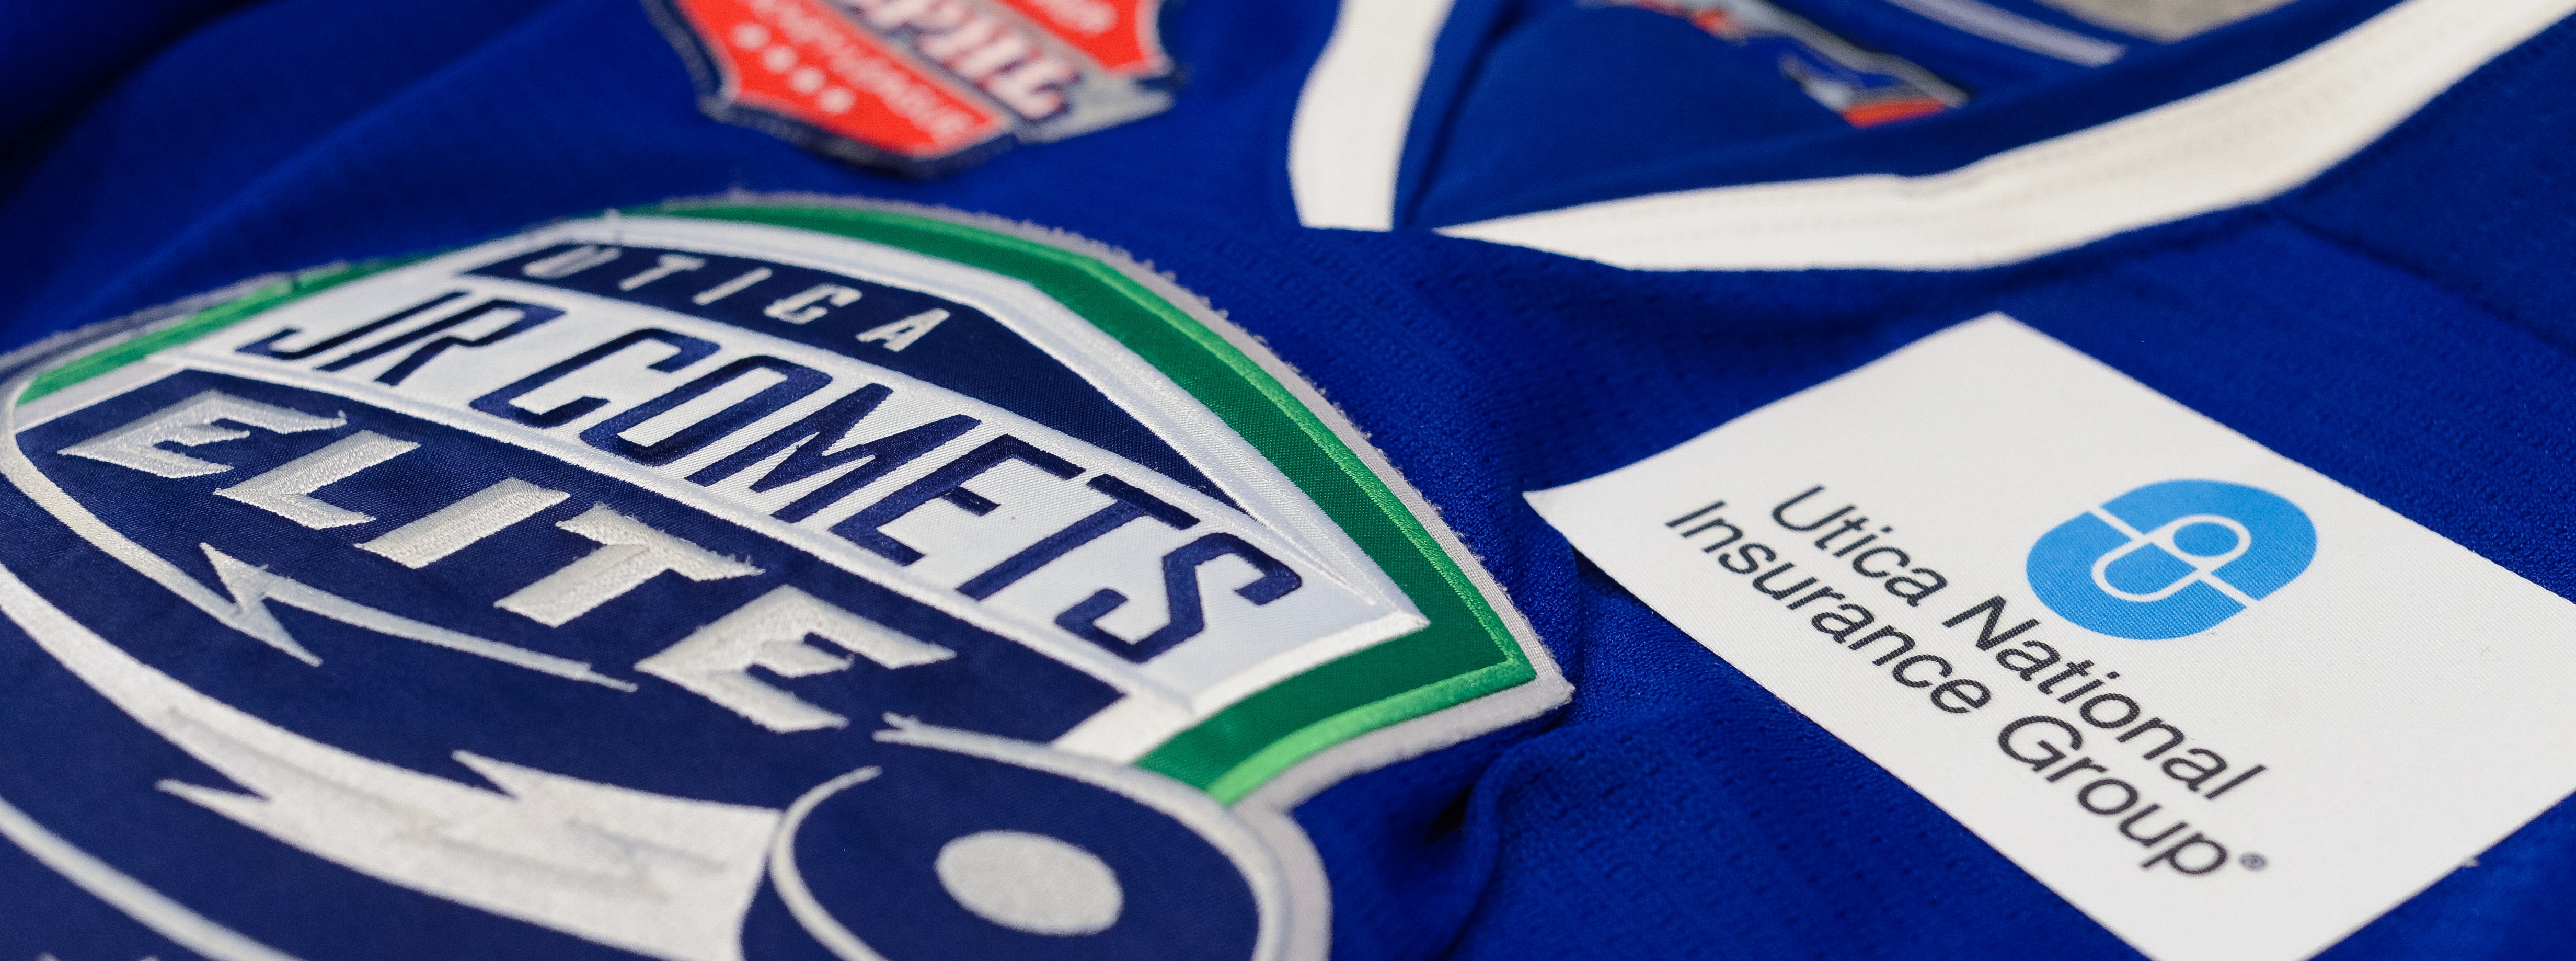 UTICA COMETS ANNOUNCE PARTNERSHIP WITH UTICA NATIONAL